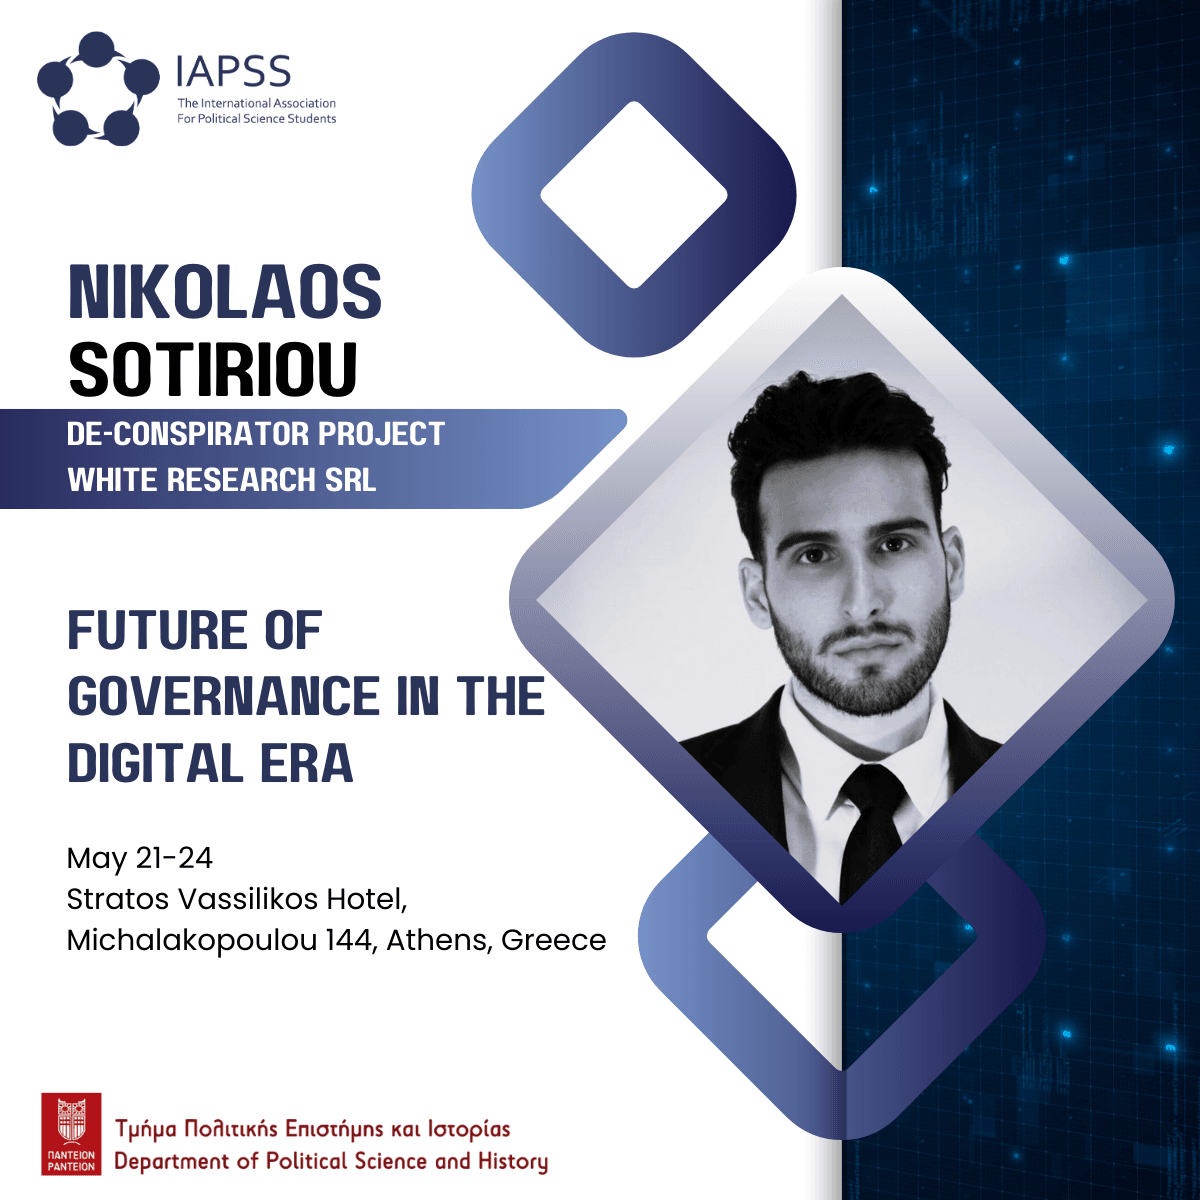 Introducing the 2024 #IAPSS WC speaker, Nikolaos Sotiriou! Nikolaos is an Associate Project Manager for White with over three years in communications, digital marketing, and event management. He studied at LSE and was a Communications Trainee at the European Commission. #Research